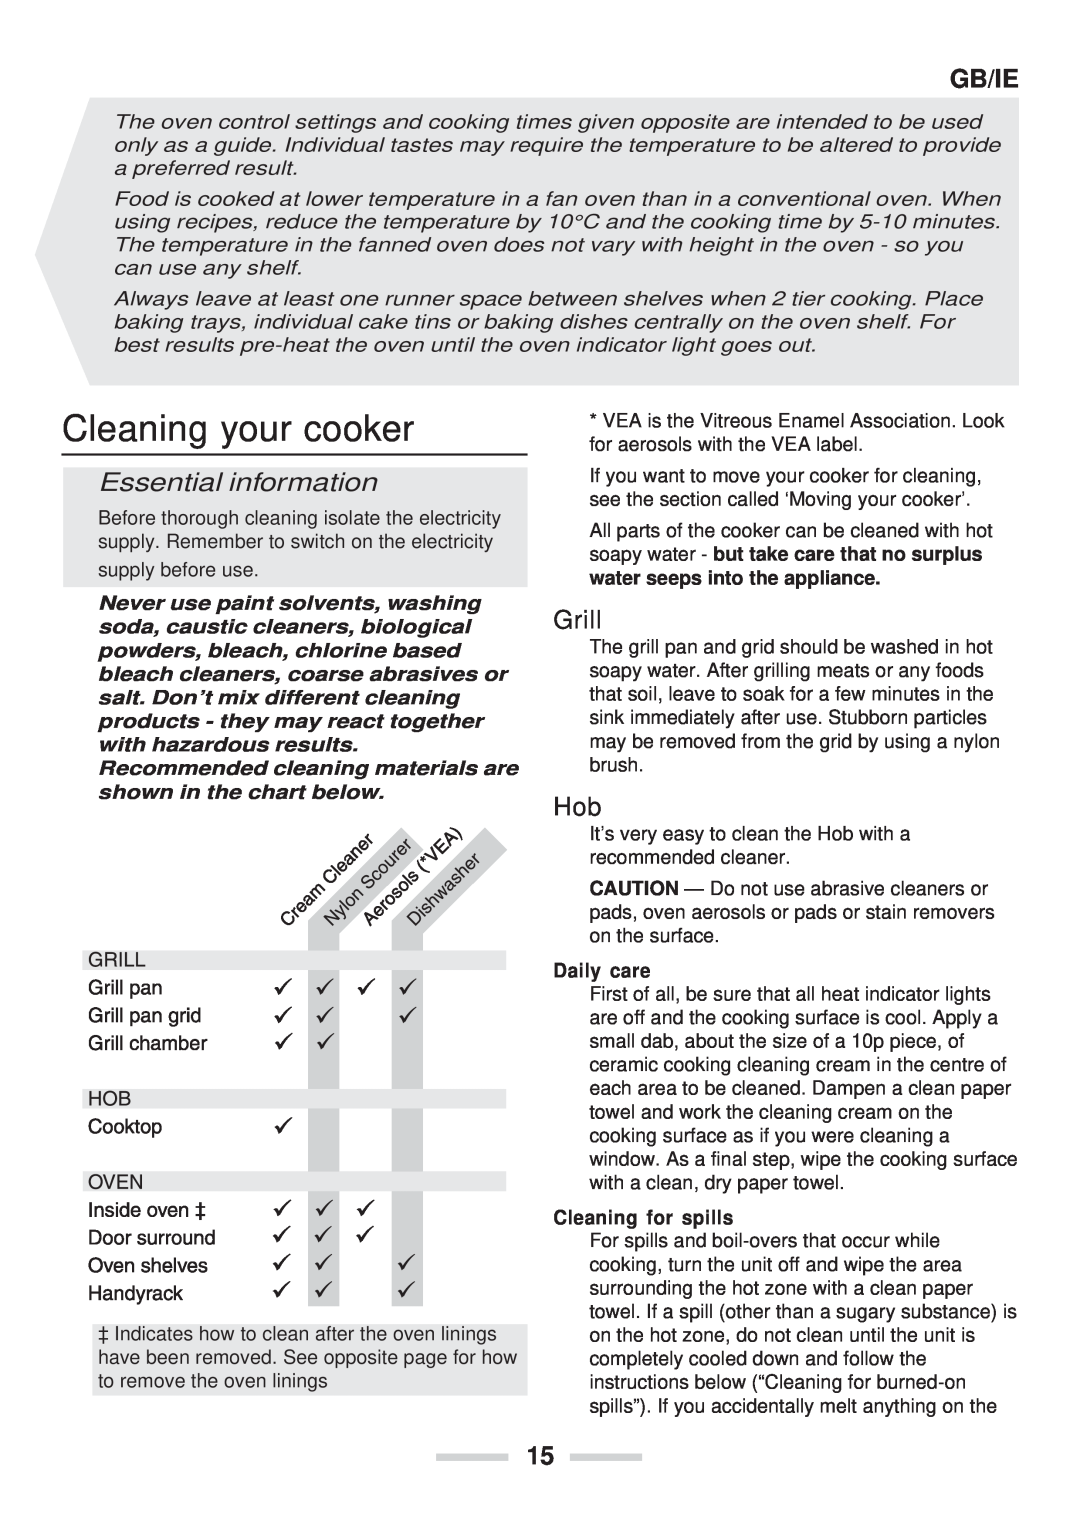 Rangemaster 90 Ceramic Cleaning your cooker, Essential information, Gb/Ie, Daily care, Cleaning for spills 